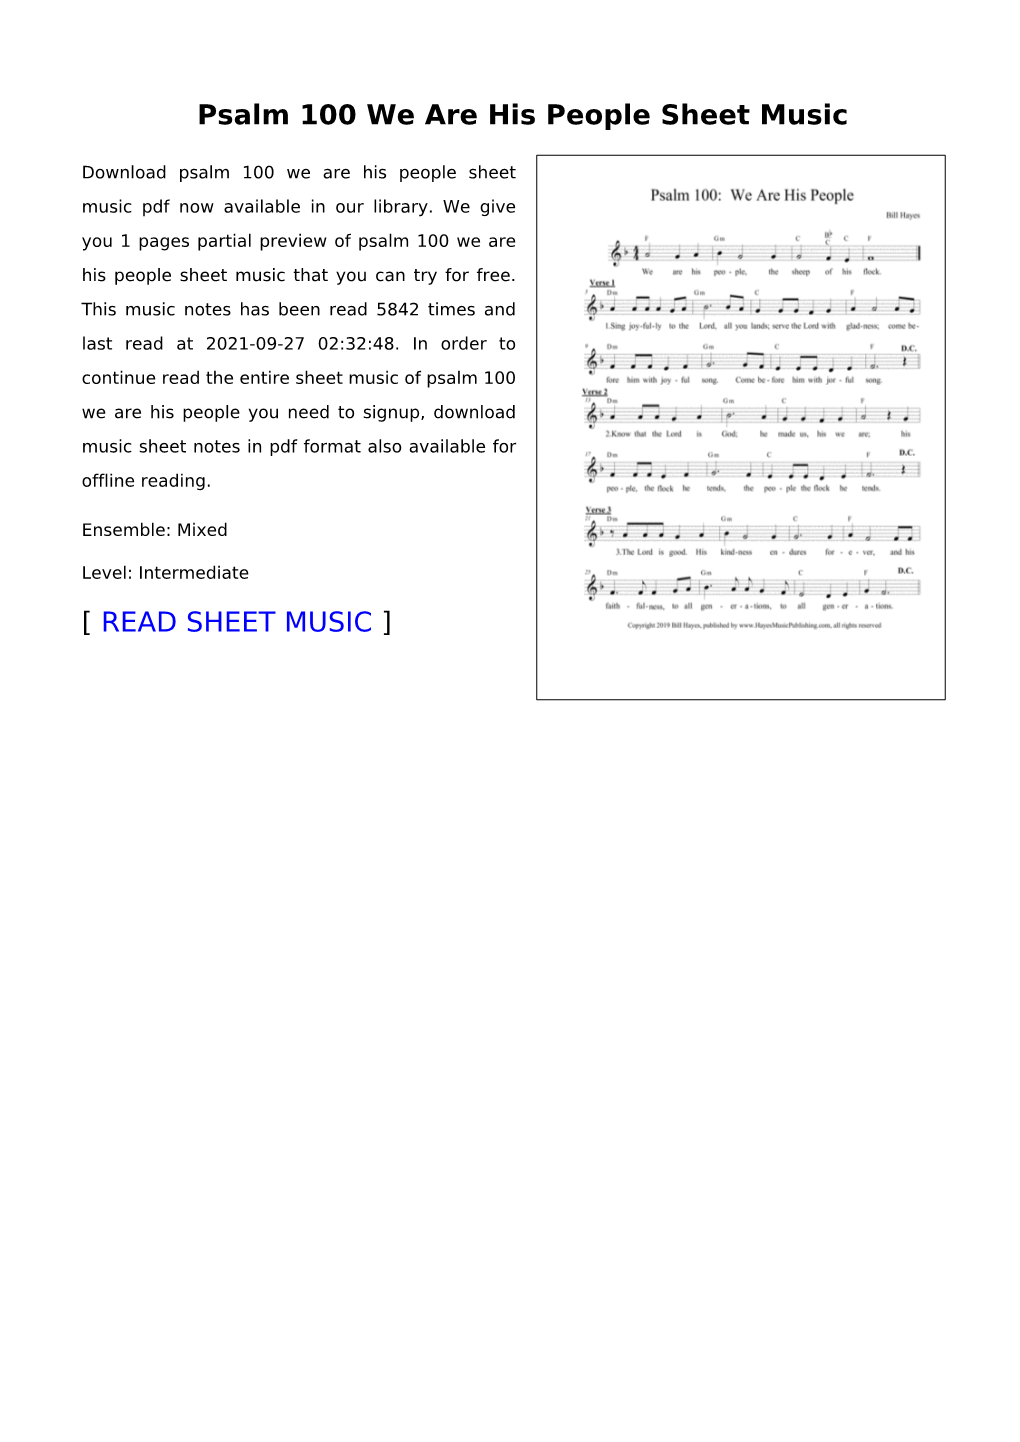 Psalm 100 We Are His People Sheet Music